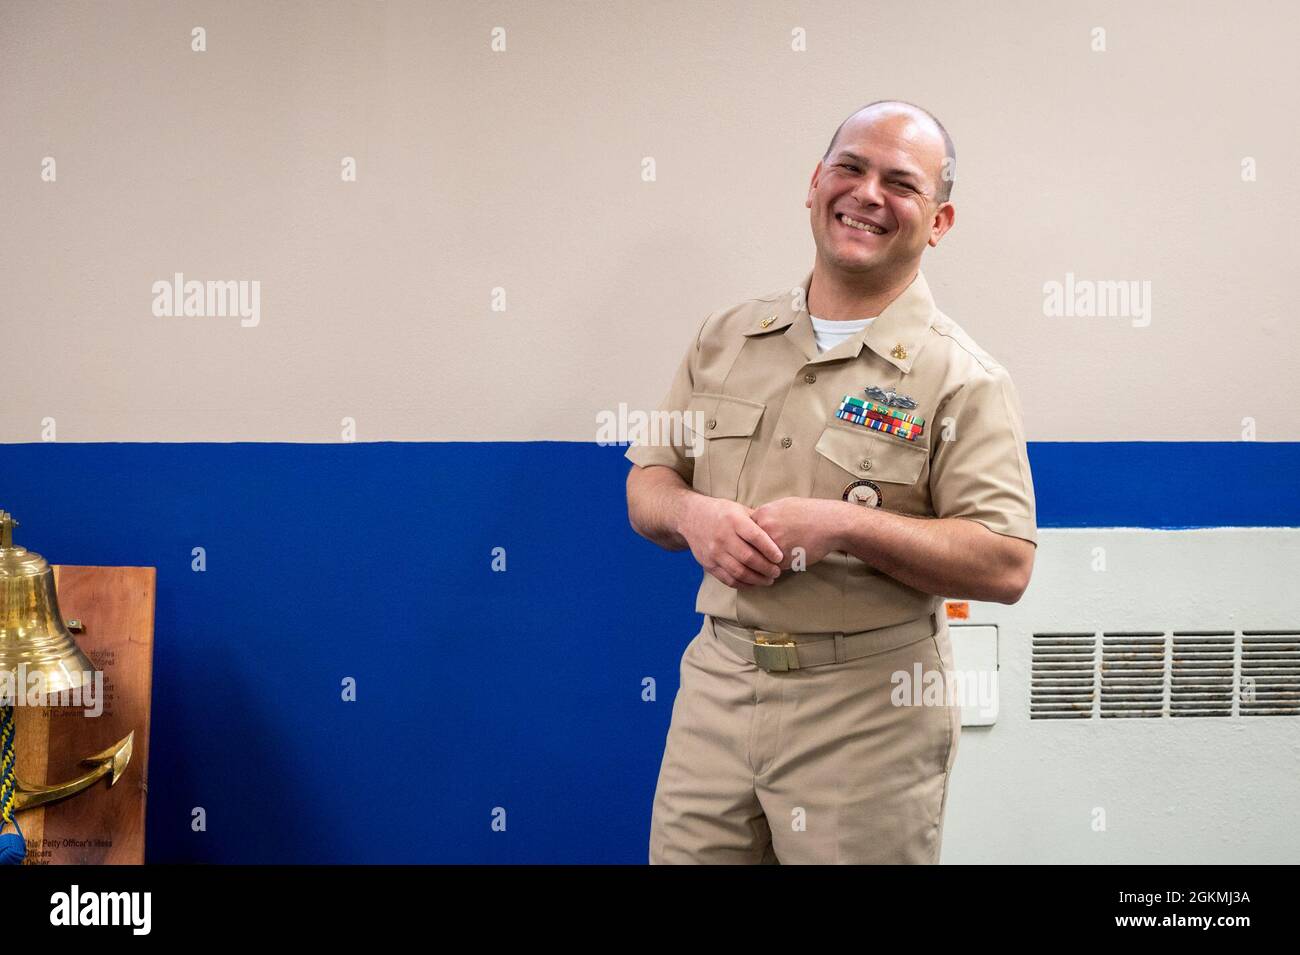 WASHINGTON, DC (May 27, 2021) – Chief Navy Counselor Eduardo Rivera laughs with his colleagues before a reenlistment ceremony held in his honor onboard Washington Navy Yard. Stock Photo